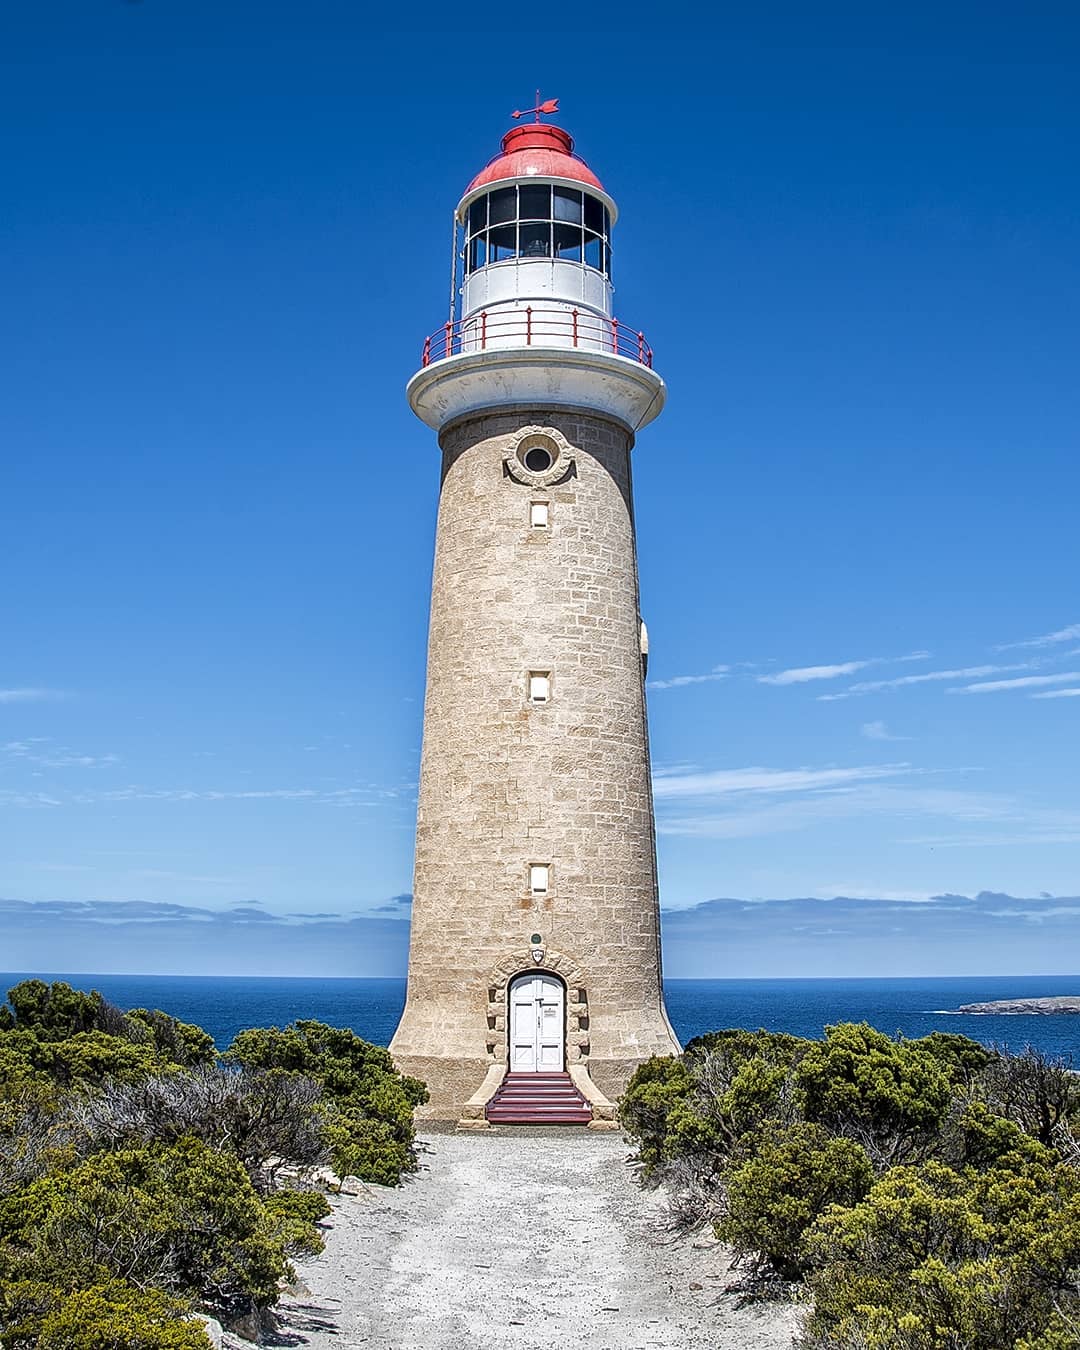 The Cape du Couedic Lighthouse  stands guard over the southwest coast of Kangaroo Island in South Australia.⠀
⠀
Deep in Flinders Chase National Park it stood since 1909 as the treacherous waters surrounding the cape have claimed three shipwrecks and 79 lives over the years. The lighthouse however, has saved countless more. ⠀
⠀
We're visiting the island with @hertzaustralia, before heading back to the mainland and driving the @greatoceanroad and then onto #Melbourne and #Sydney. ⠀⠀
-⠀⠀
-⠀⠀
-⠀⠀
-⠀⠀
-⠀⠀
-⠀⠀
-⠀⠀
@sealinkki @authentickangarooisland #KangarooIsland #capeducouediclighthouse #capeducouedic #FlindersChase #FlindersChaseNationalPark #SeeSouthAustralia #SouthAustralia #SeaLinkKI  #SeeAustralia #visitaustralia #Australia #authenticKI #lighthouse #wildlifephotography #Adelaide #australiansummer #australianstyle #oceanair #KI #roadtrip #roadtripaustralia #roadtripping #driveaustralia #wonderful_places #exploretocreate #watchthisinstagood #lppathfinders #ausgeo